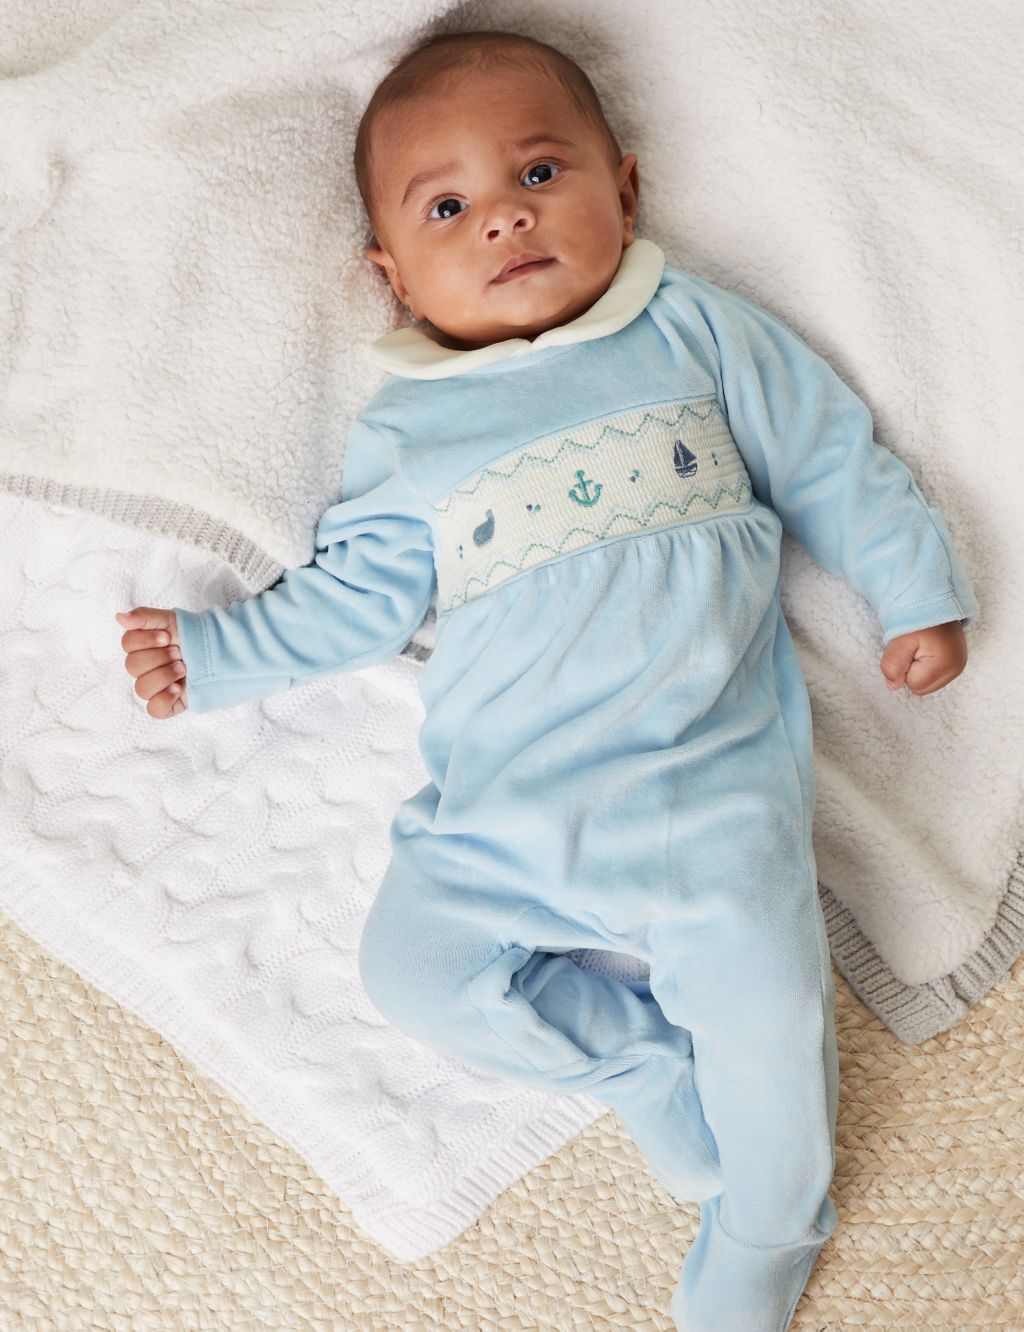 Cotton Rich Sleepsuit (7lbs- Yrs)